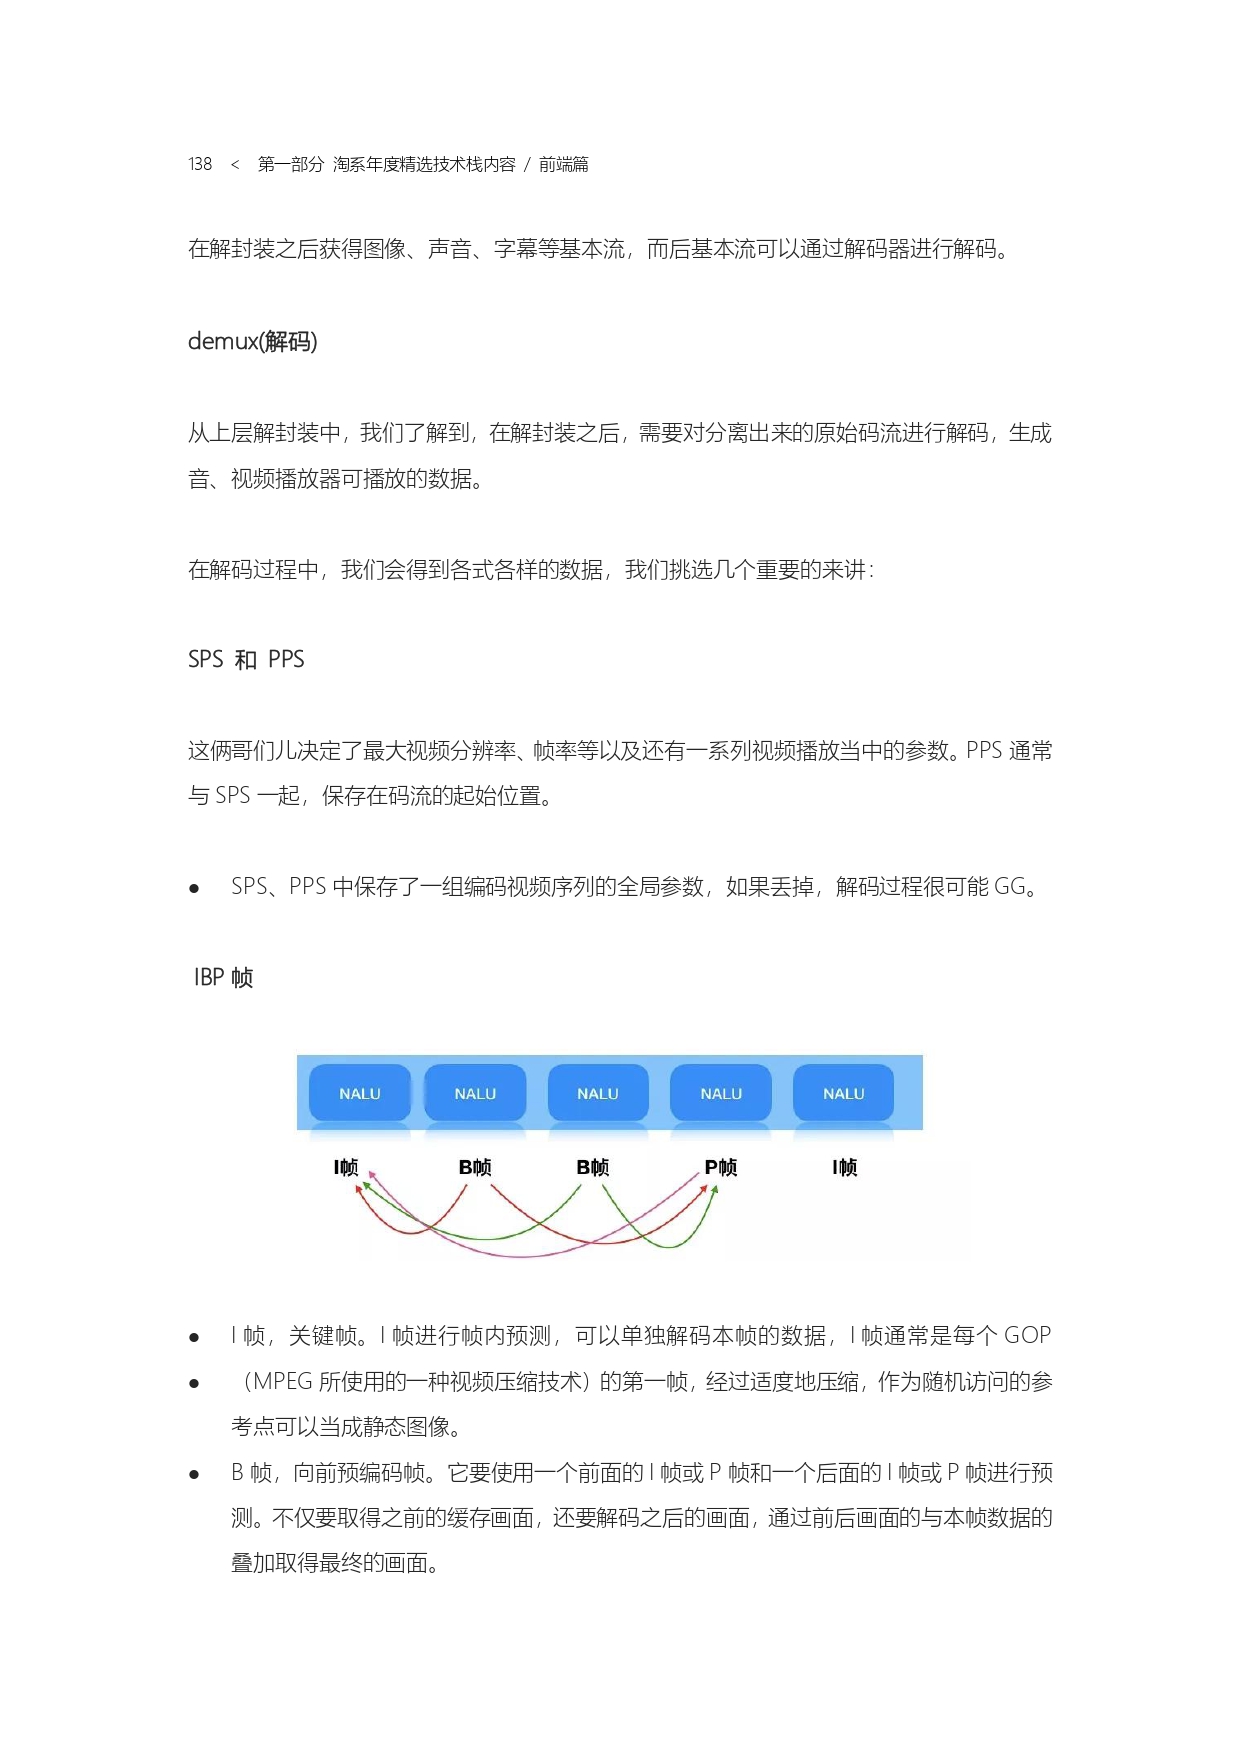 The Complete Works of Tao Technology 2020-1-570_page-0138.jpg